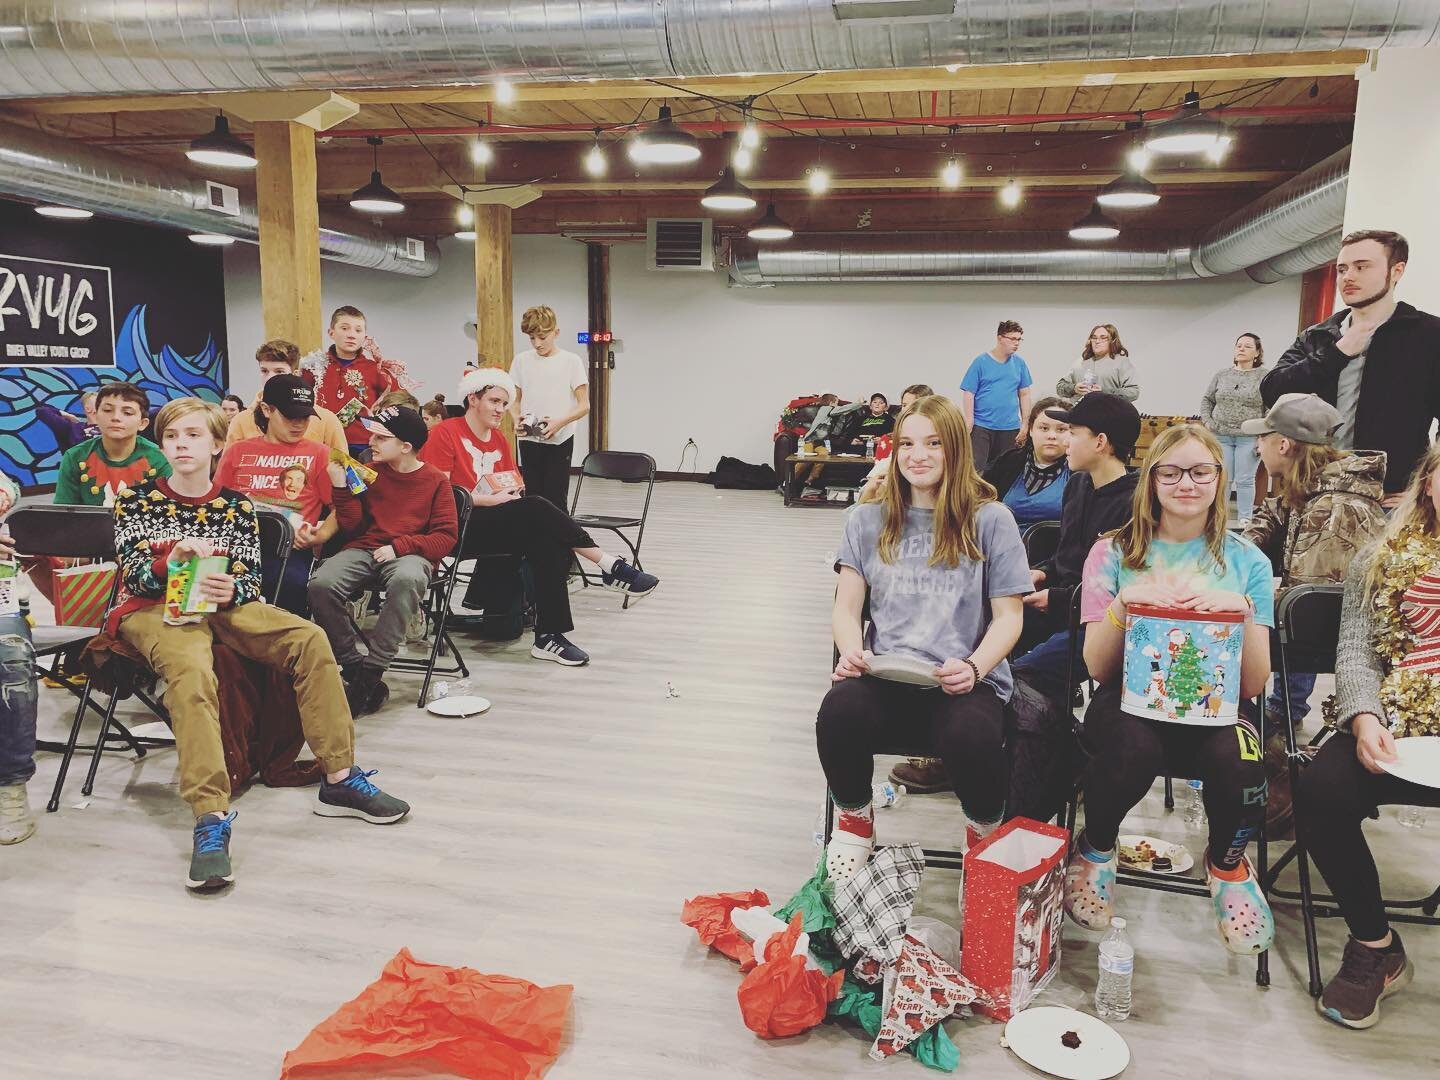 Some fun photos of our annual Christmas Party! The teens wore their ugliest Christmas attire, participated in a white elephant gift exchange, played some fun games, and had fun unwrapping over 800ft of plastic wrap 😂 We will see you guys in the New 